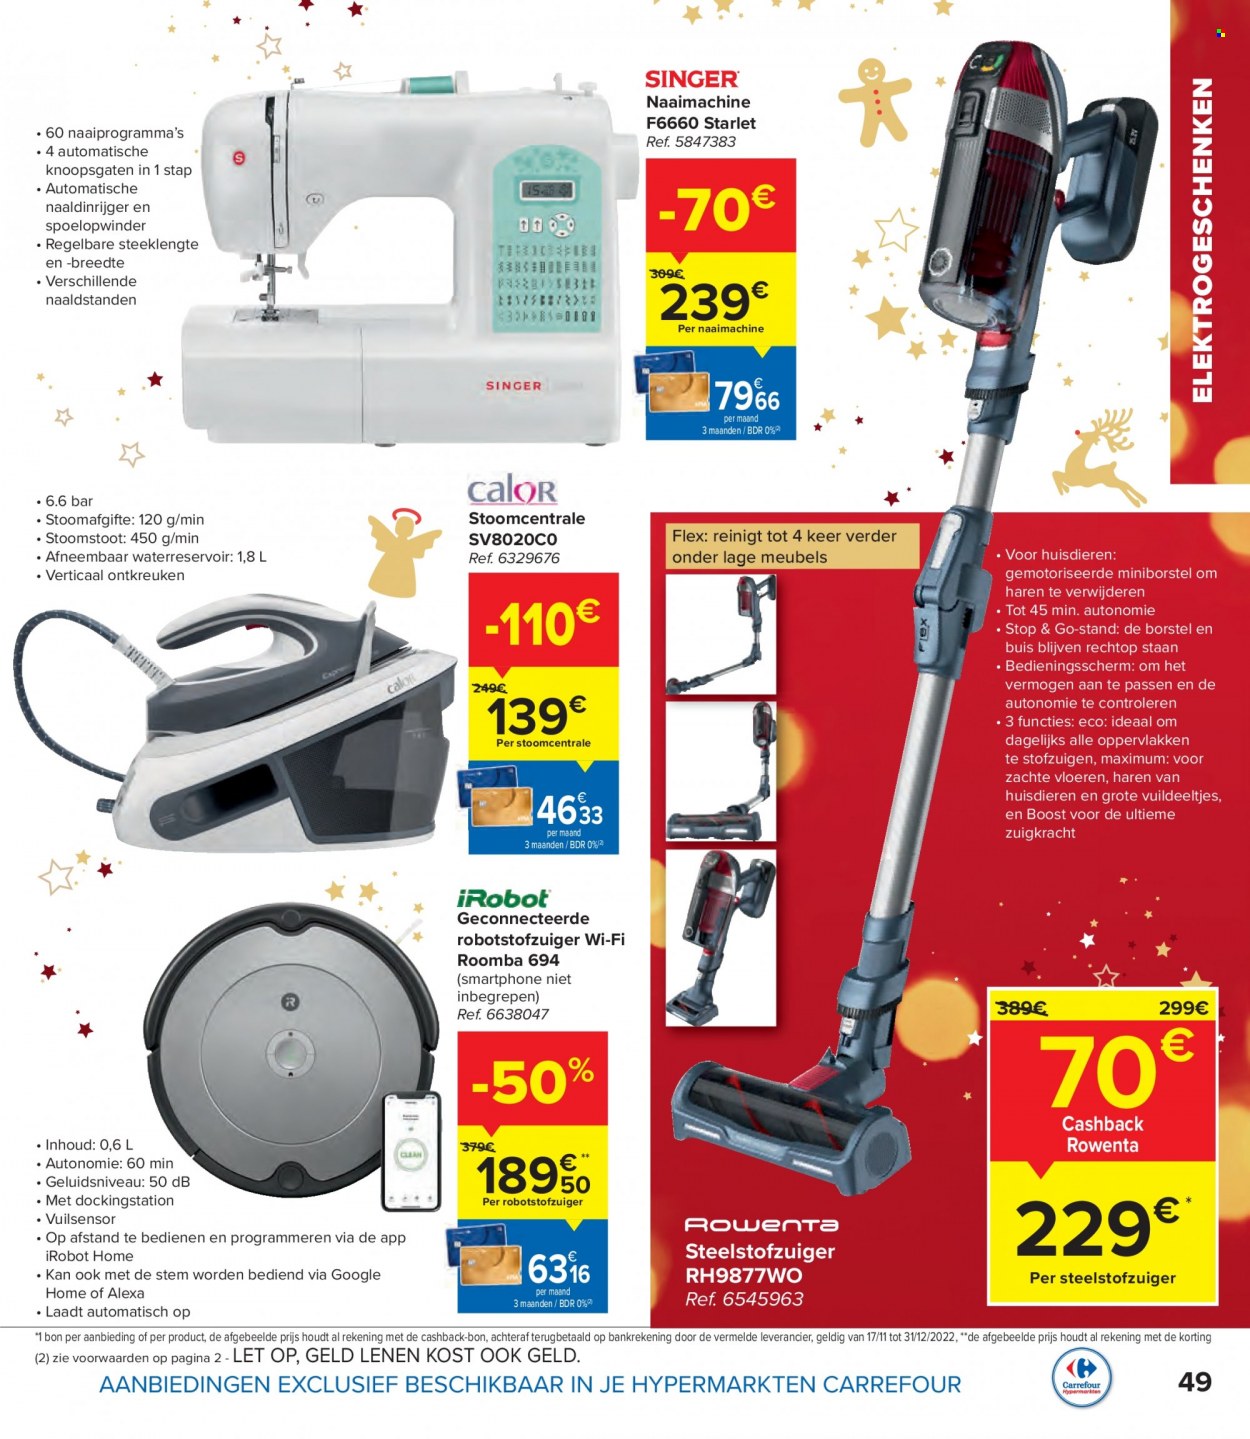 Catalogue Carrefour hypermarkt - 16.11.2022 - 31.12.2022. Page 49.